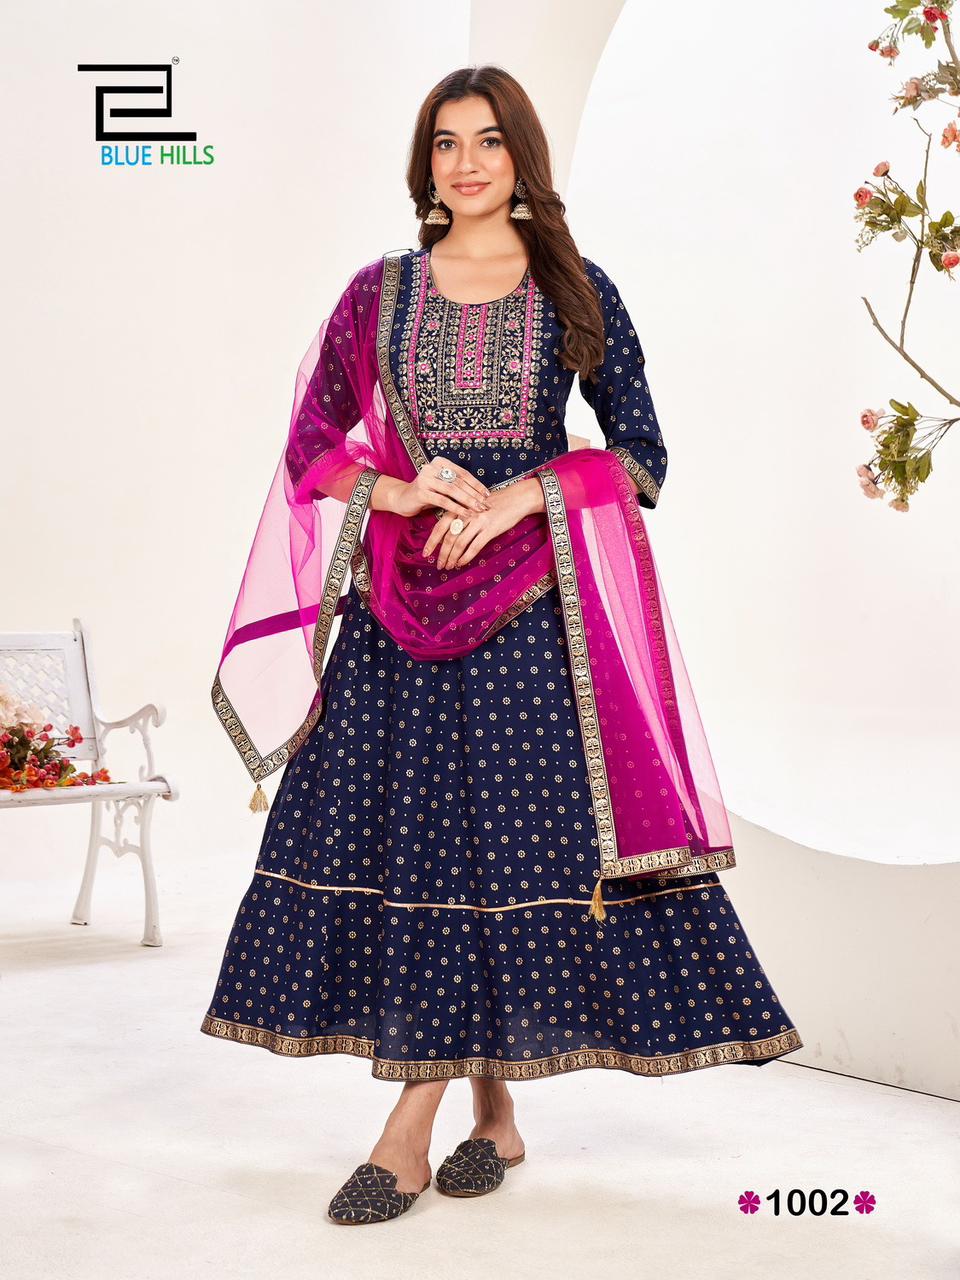 Blue Hills Manika Mage Hithe Vol 20 collection 5